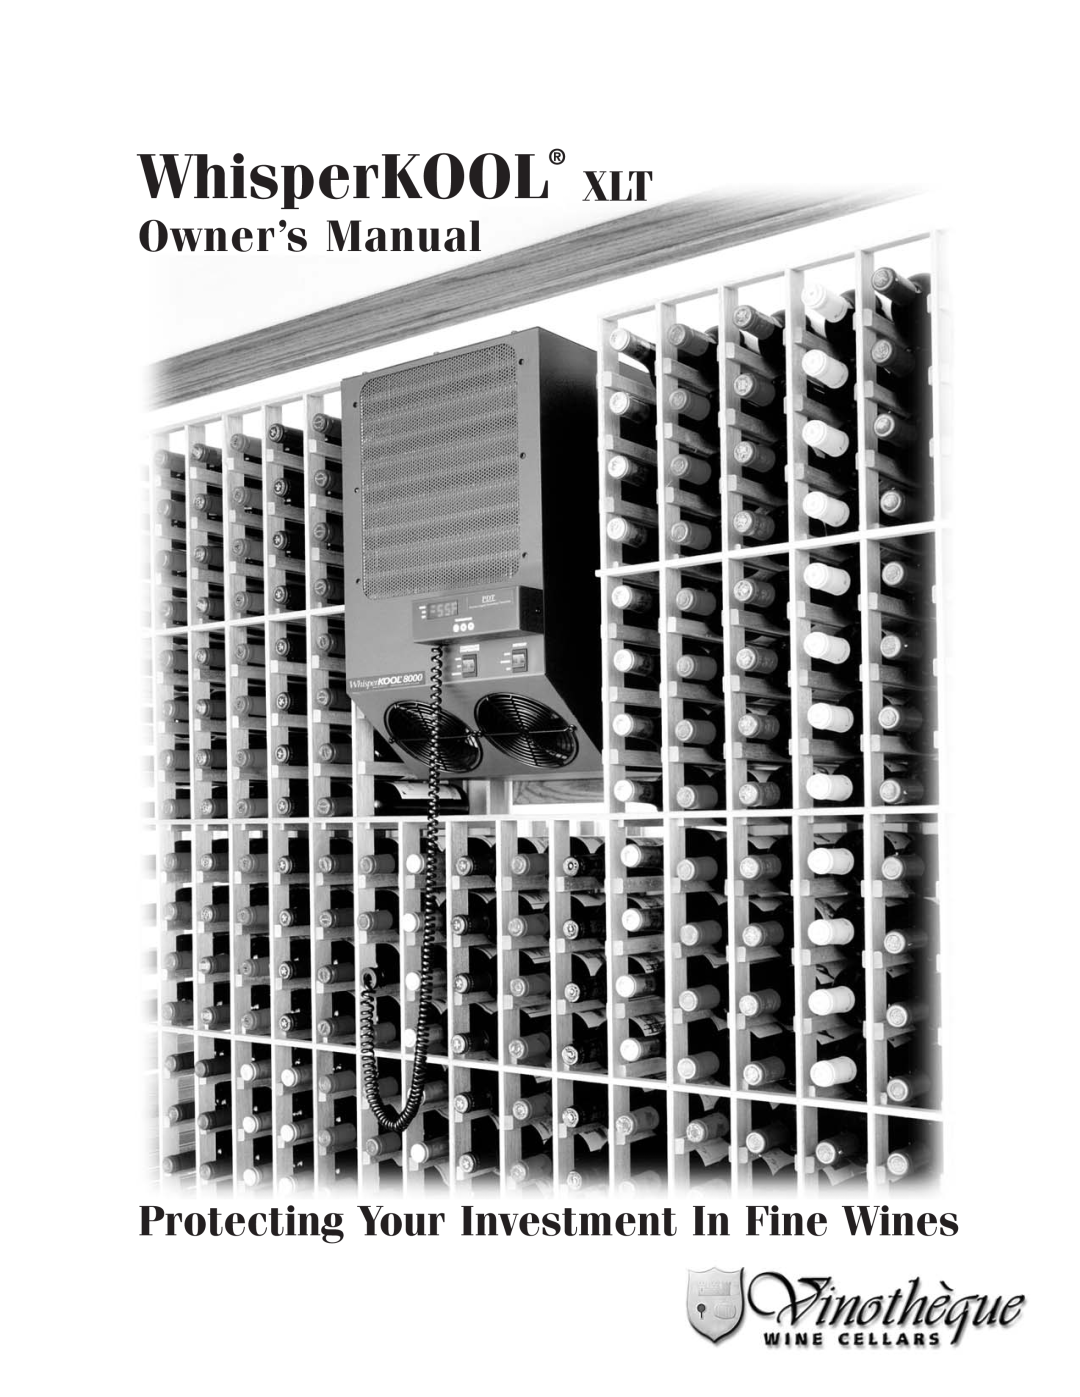 WhisperKool 17-1103 owner manual WhisperKOOL XLT, Protecting Your Investment In Fine Wines 